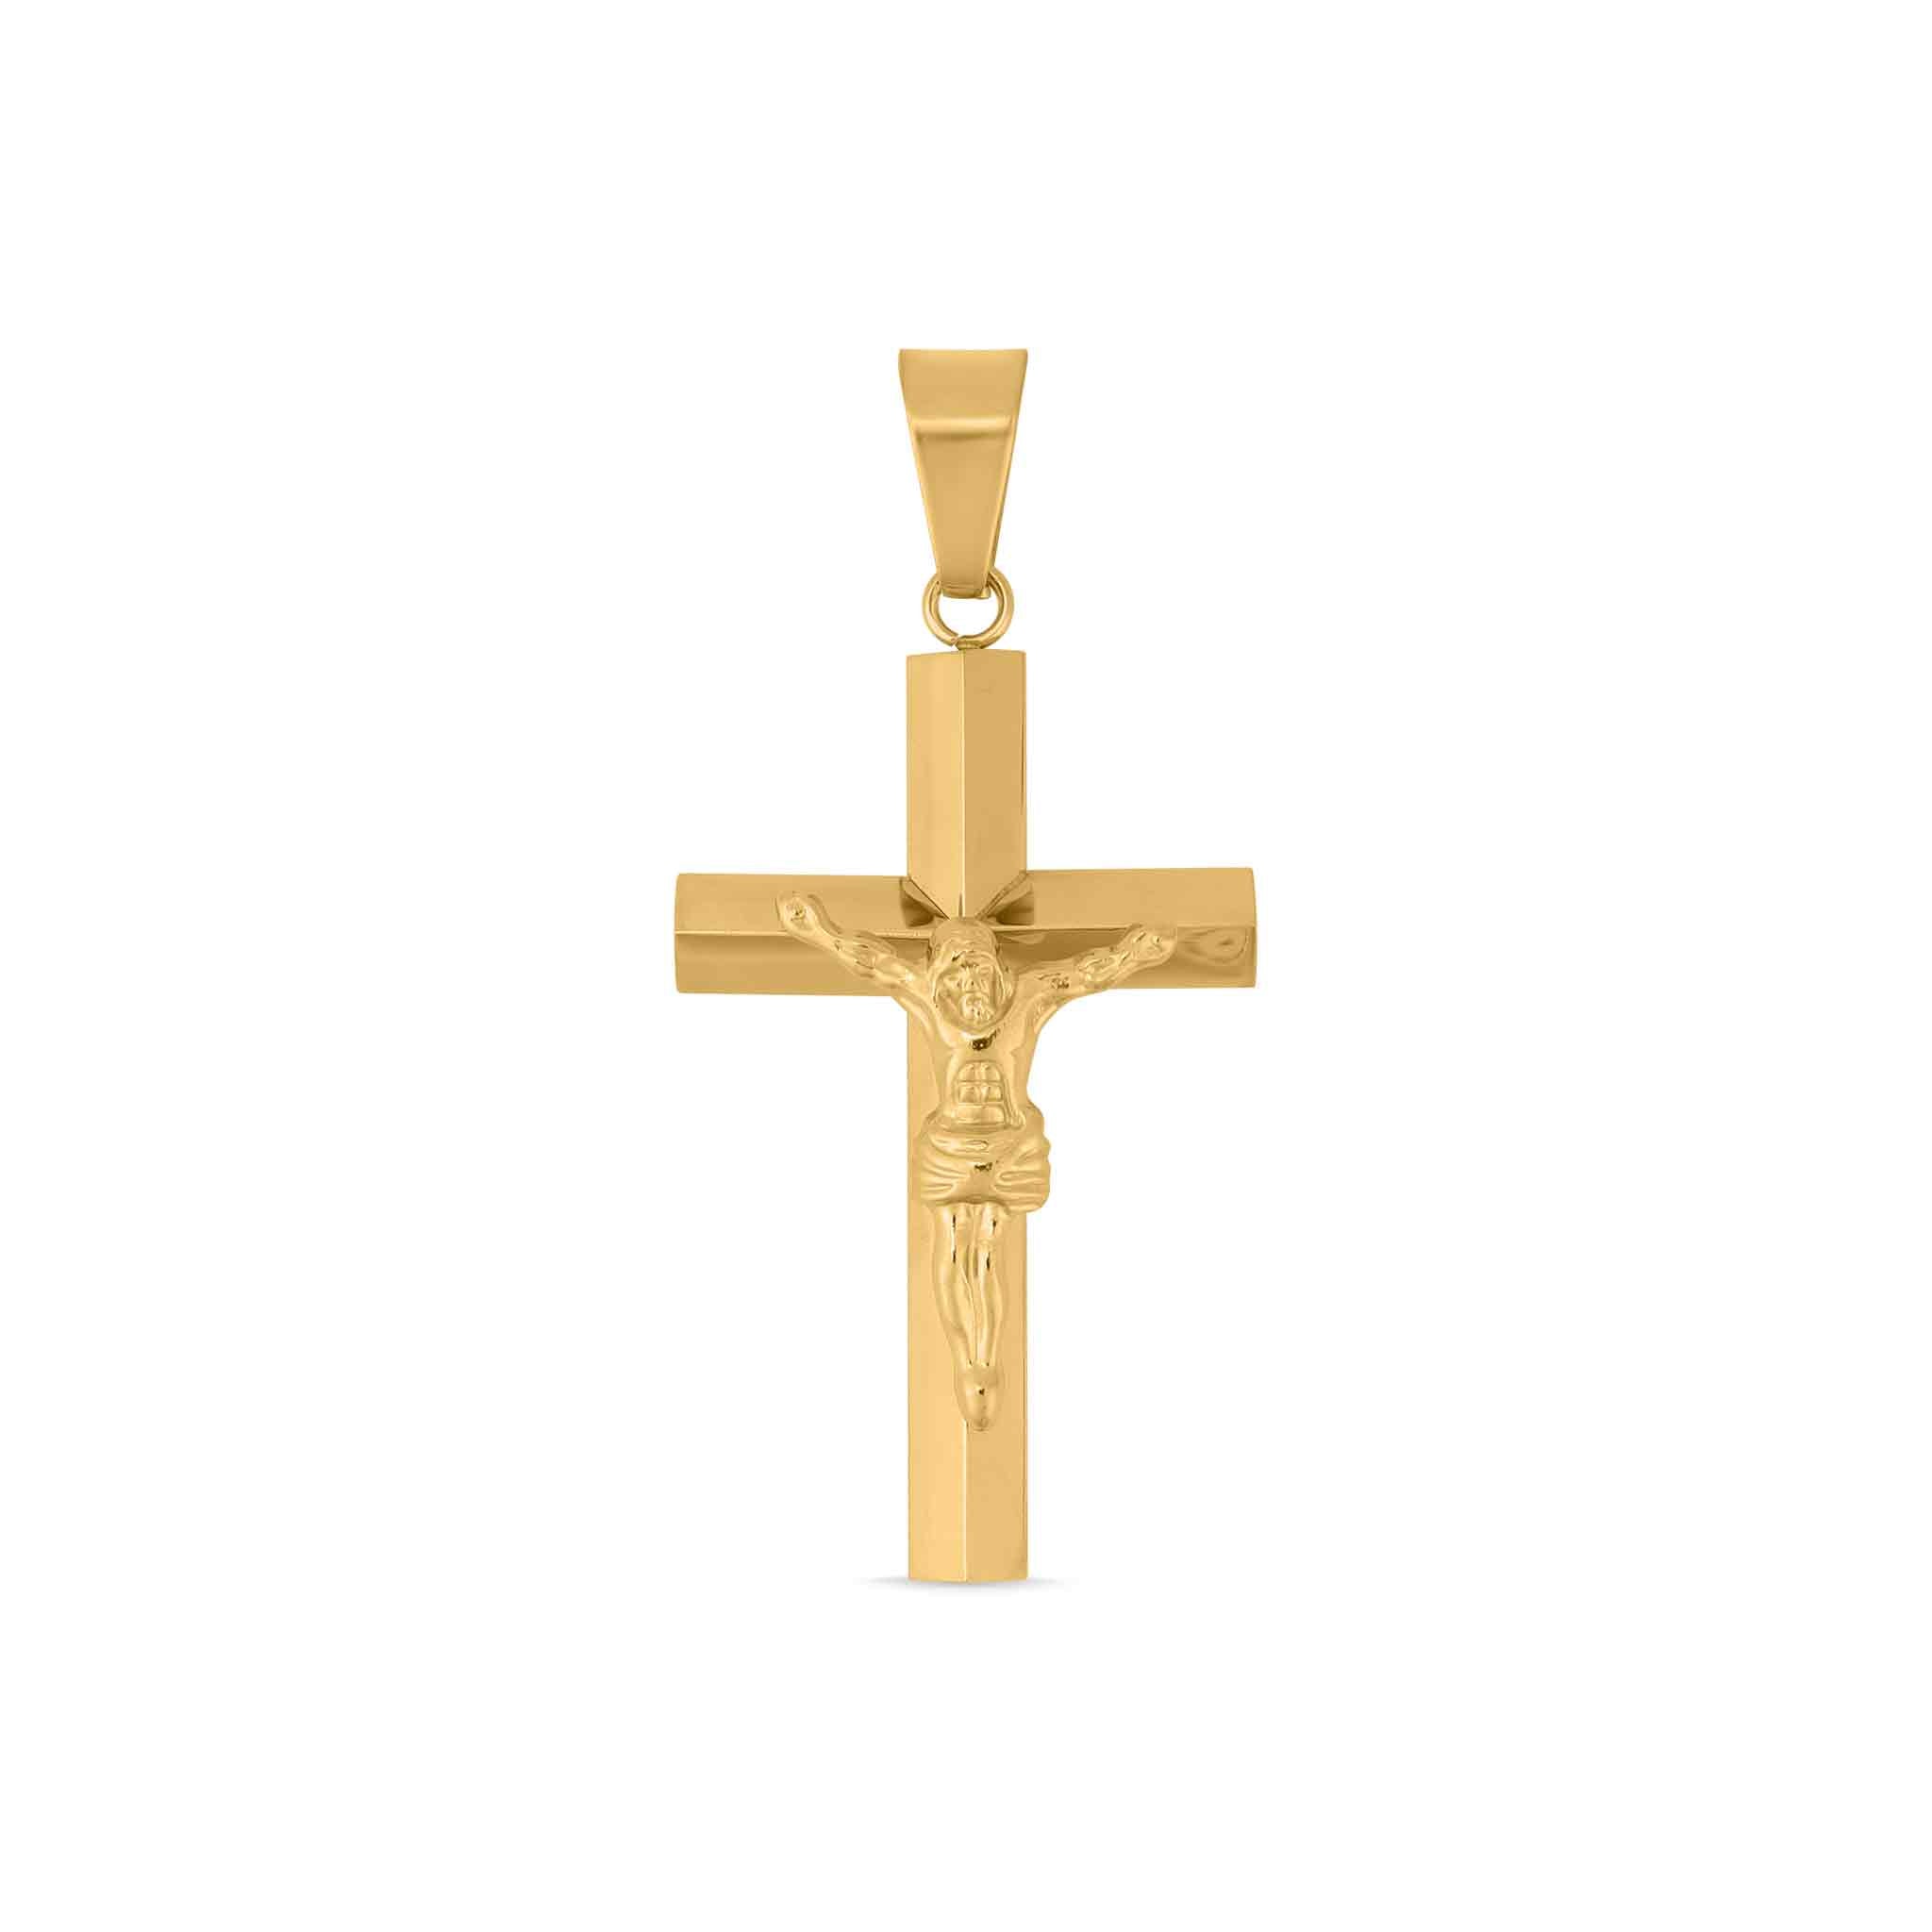 18K Gold PVD Coated Medium Crucifix Cross Stainless Steel Pendant / PDL9018